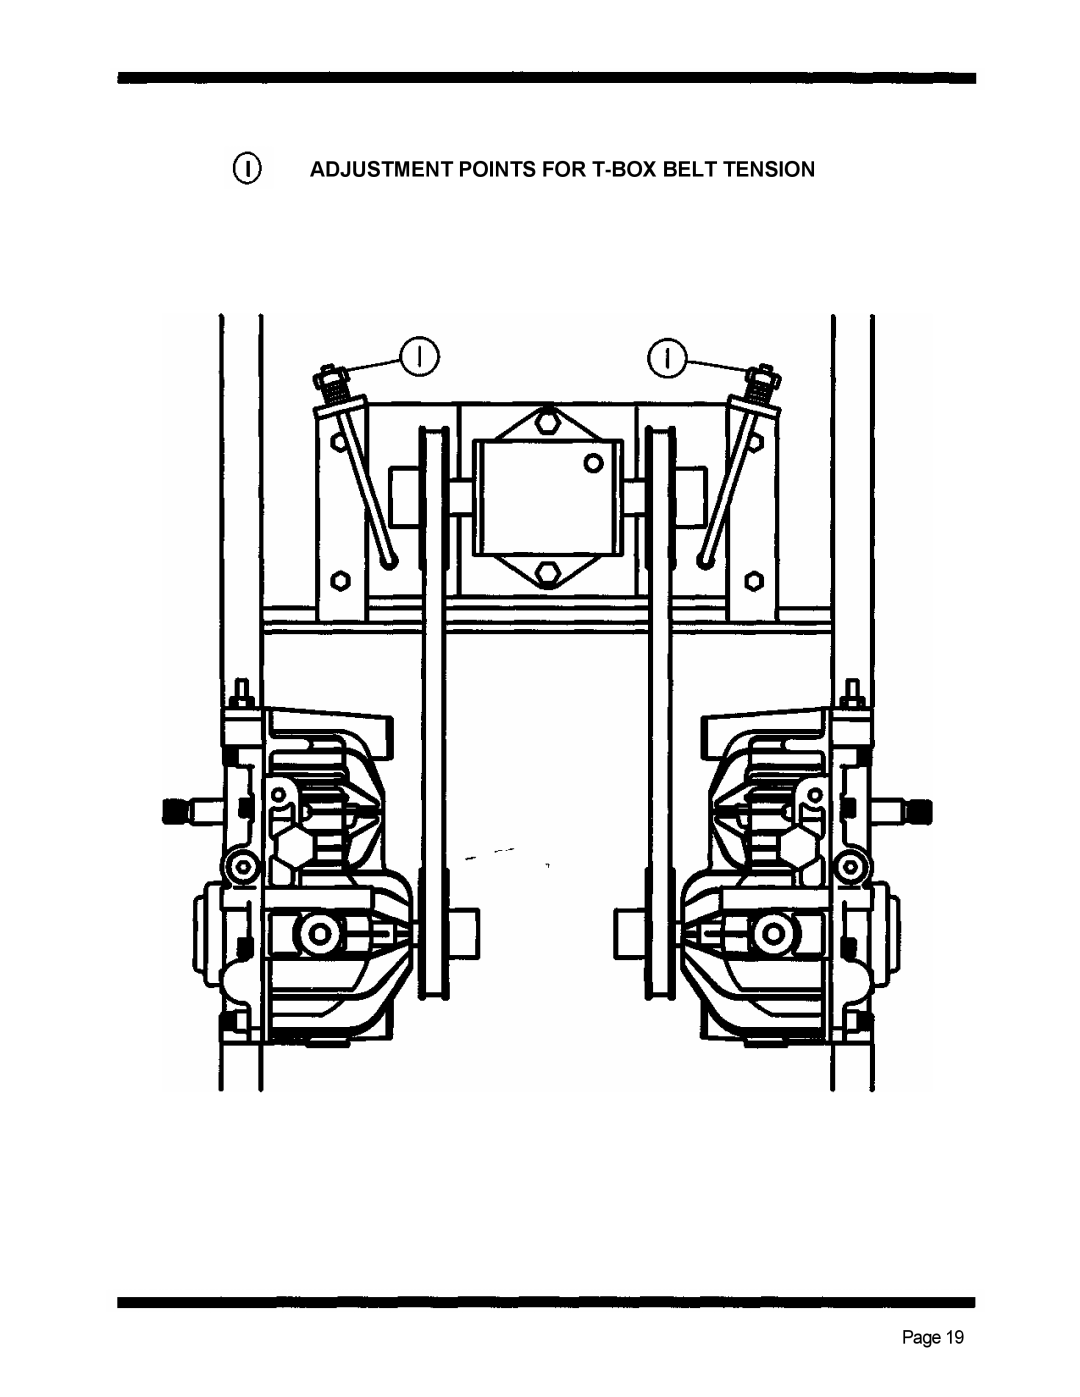 Dixon 5501 manual Adjustment Points For T-Boxbelt Tension, Page 